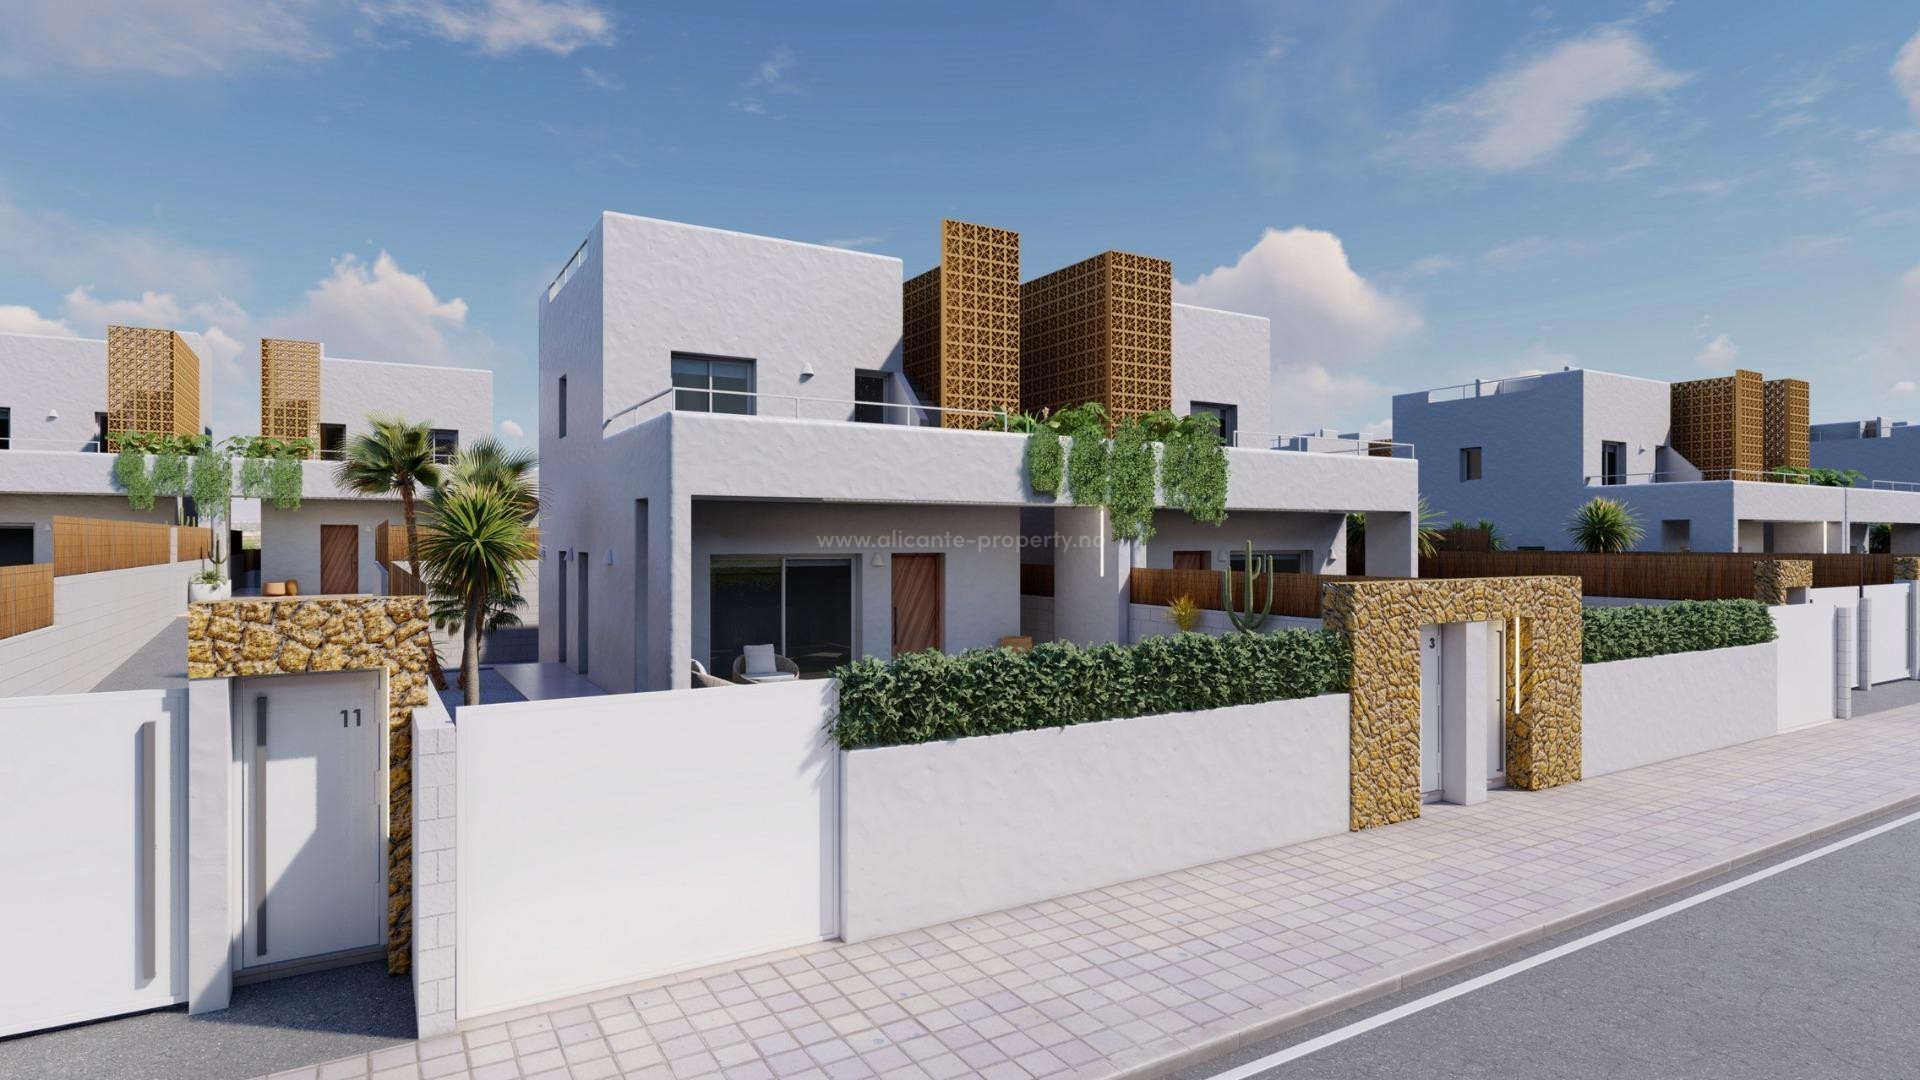 New villas/houses in Pilar de la Horadada, 3 bedrooms, 3 bathrooms, large landscaped garden with private swimming pool and parking space.